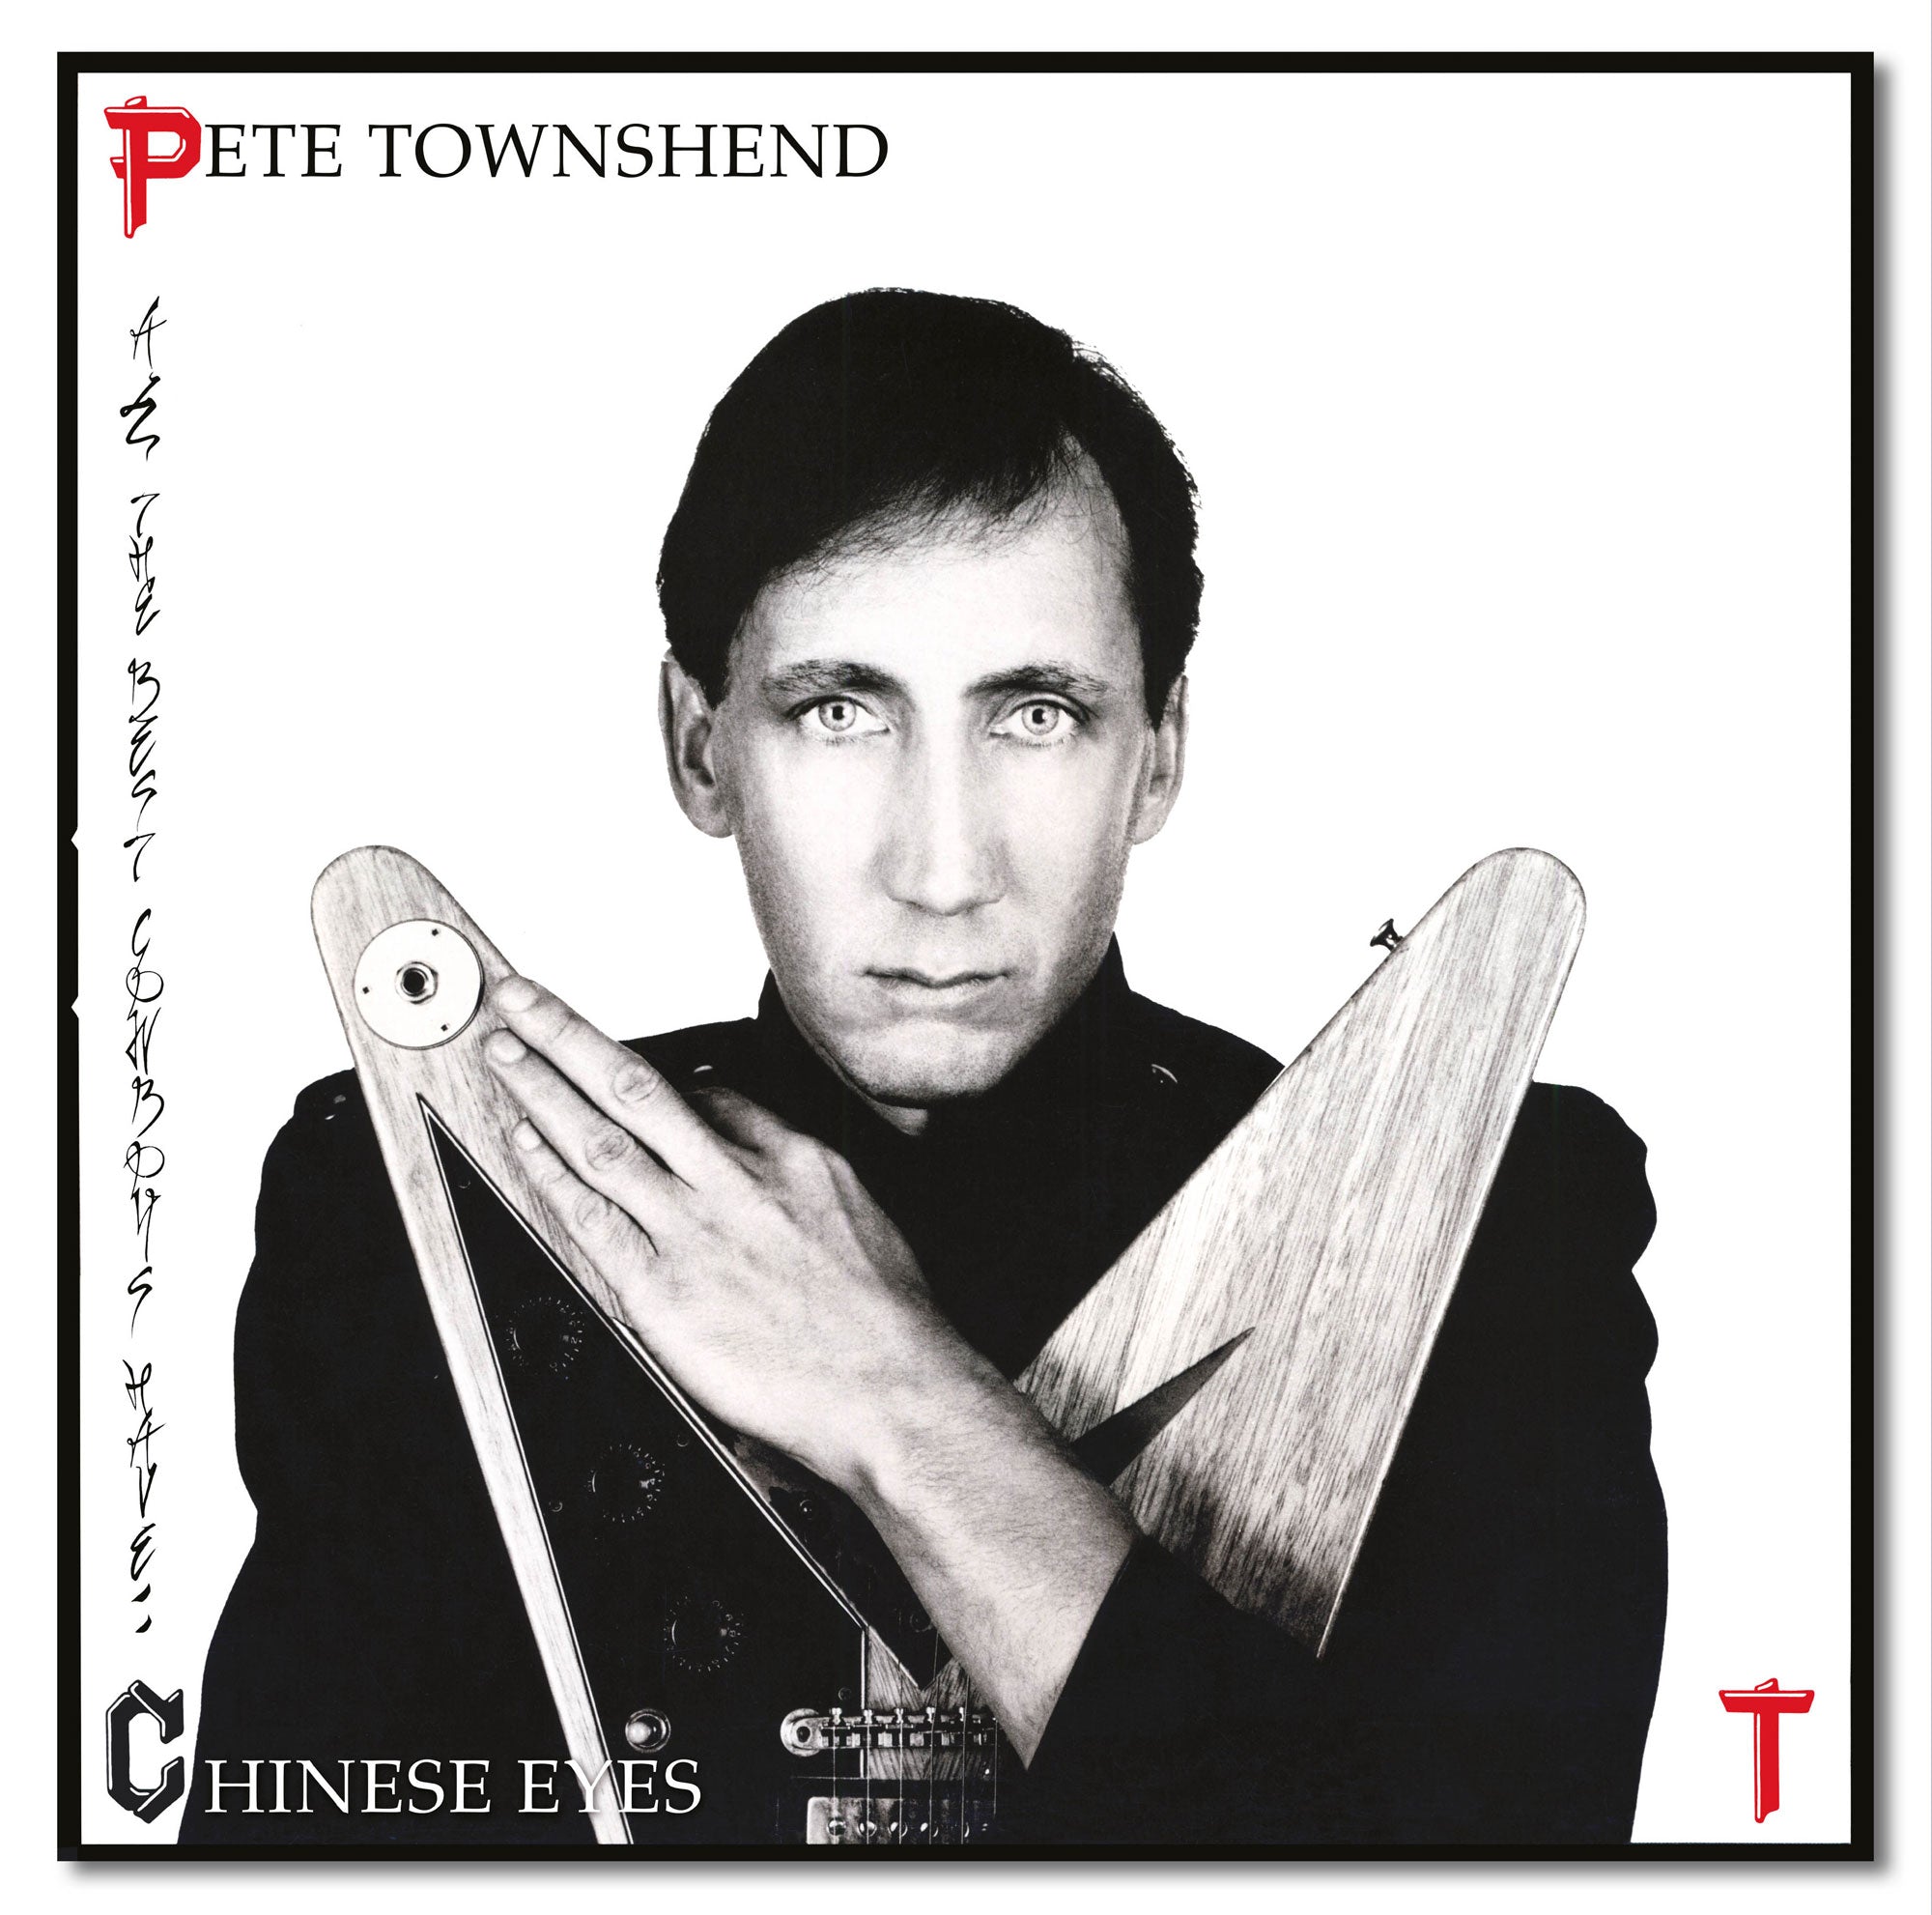 Pete Townshend - All The Best Cowboys Have Chinese Eyes: Half Speed Master Vinyl LP